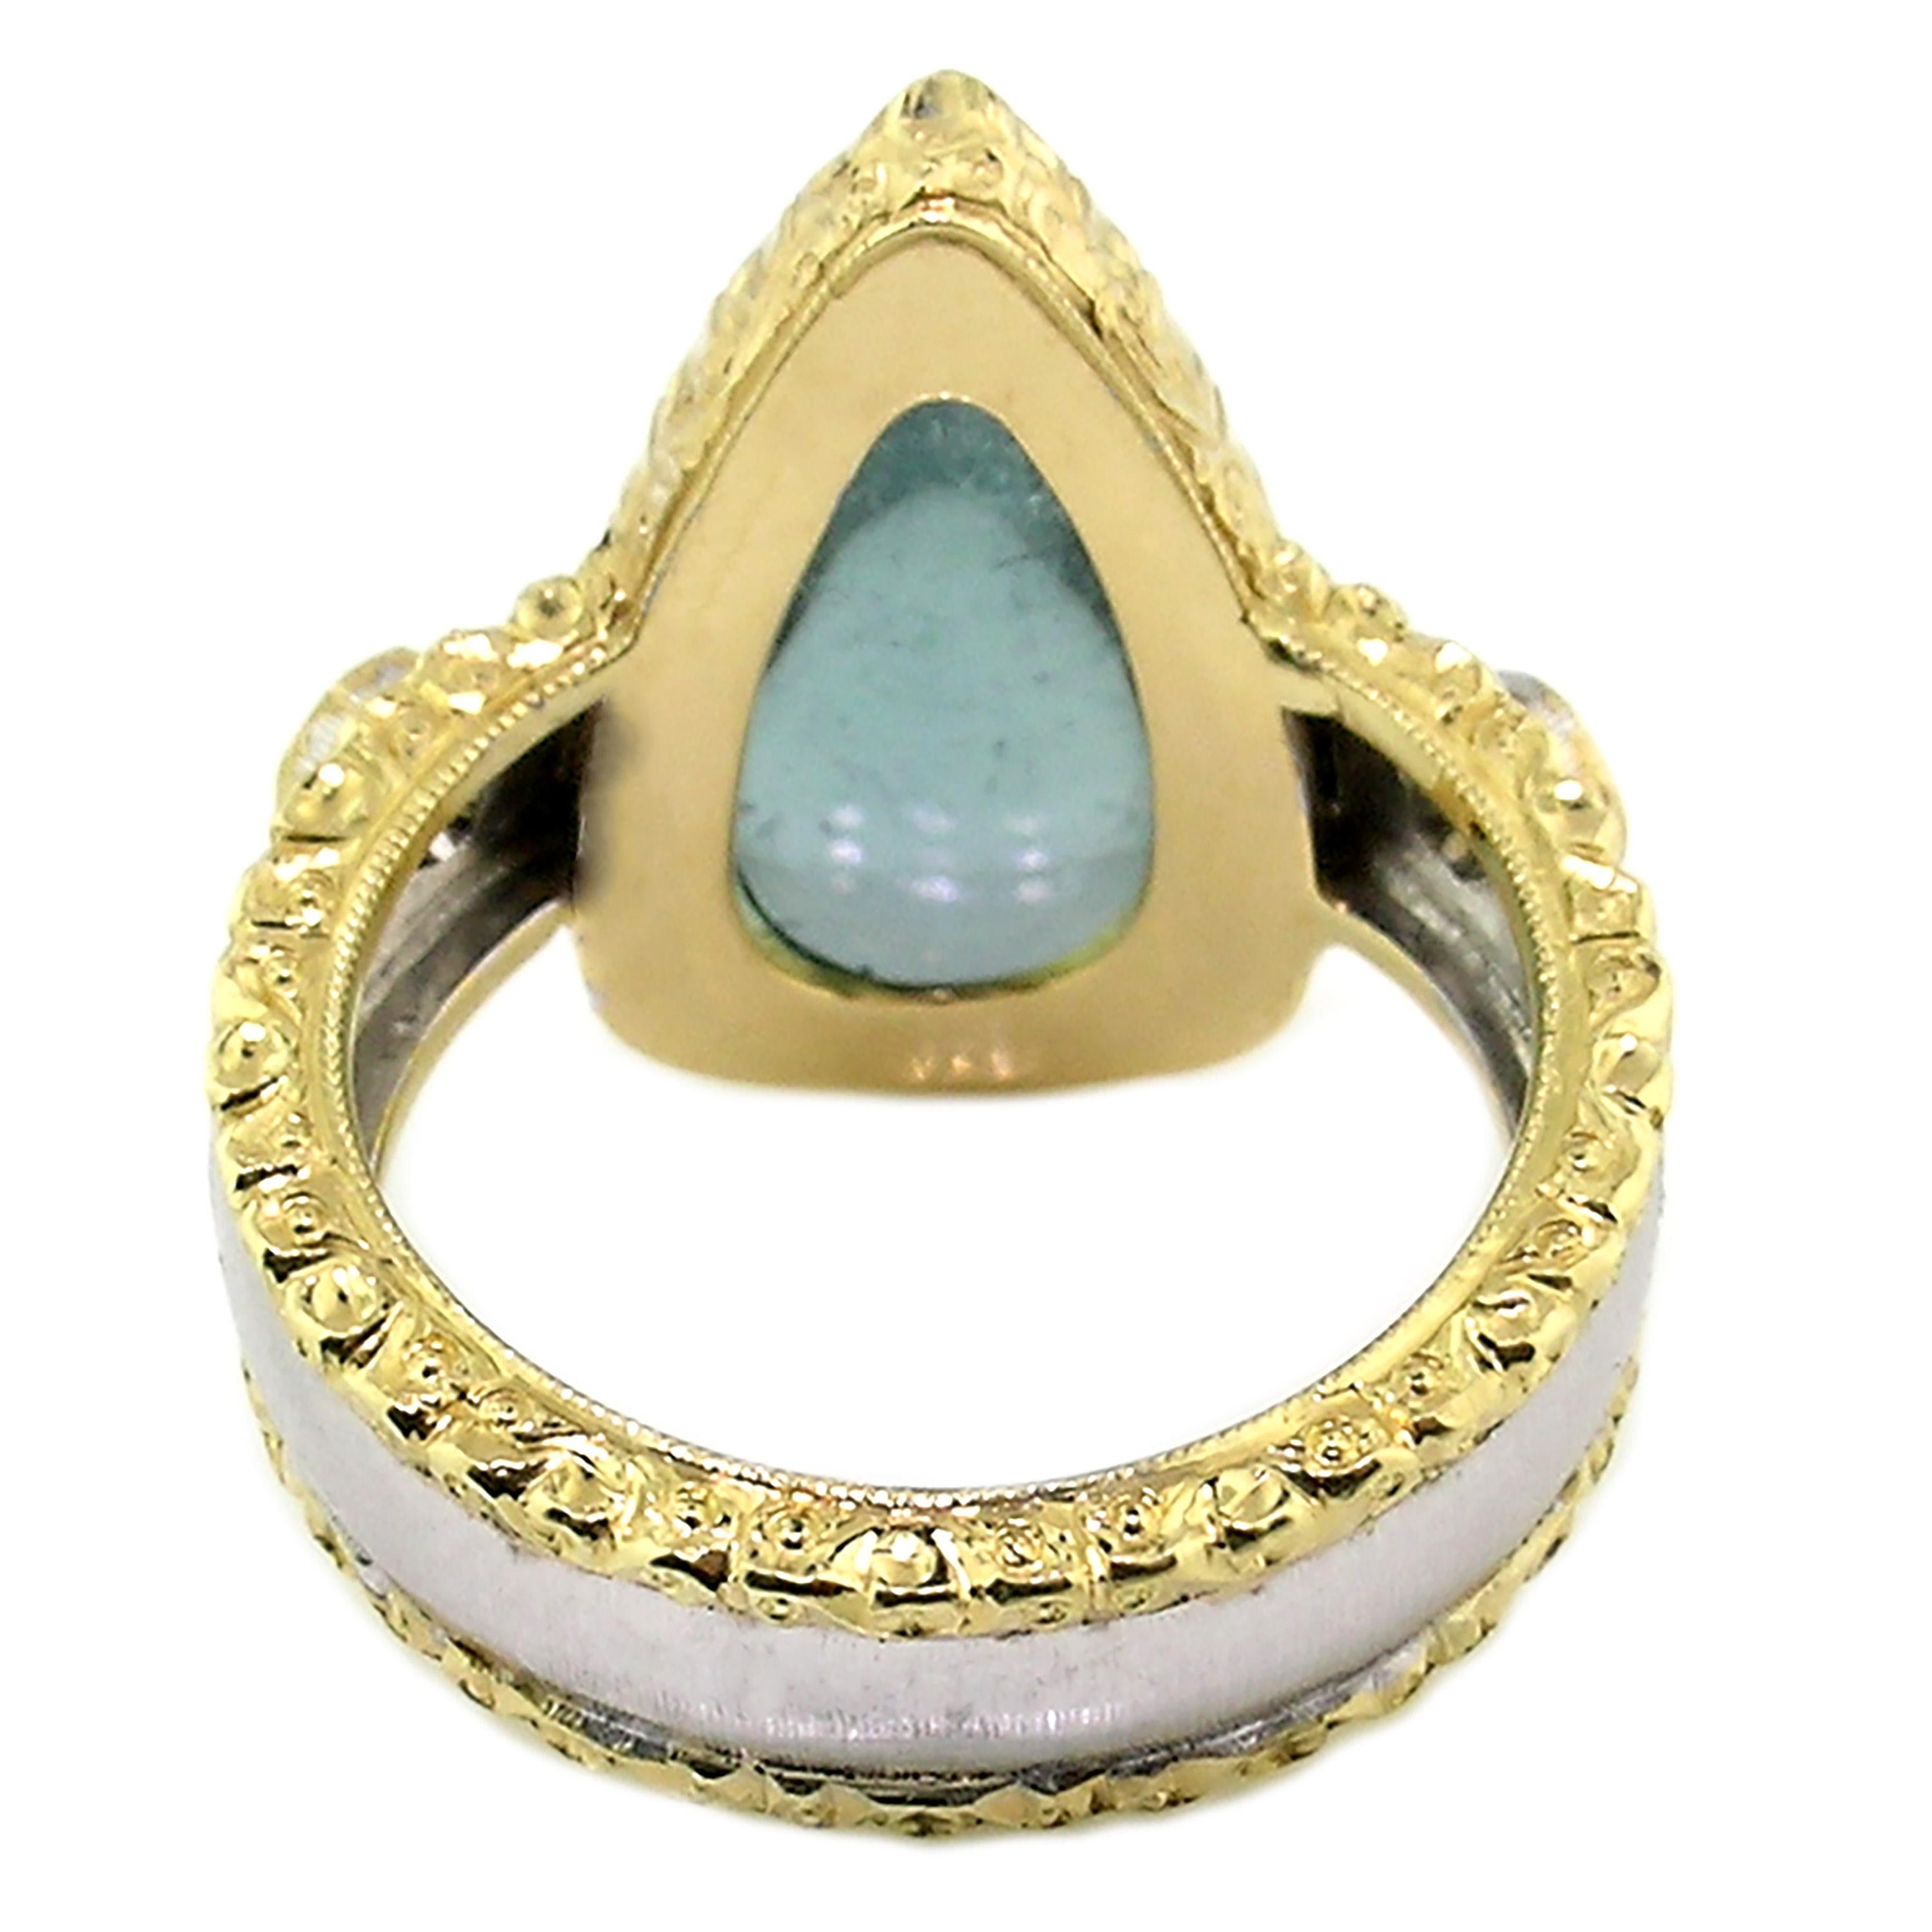 Cabochon 8.86ct Blue Tourmaline and Diamond 18kt Gold Ring Made in Italy by Cynthia Scott For Sale